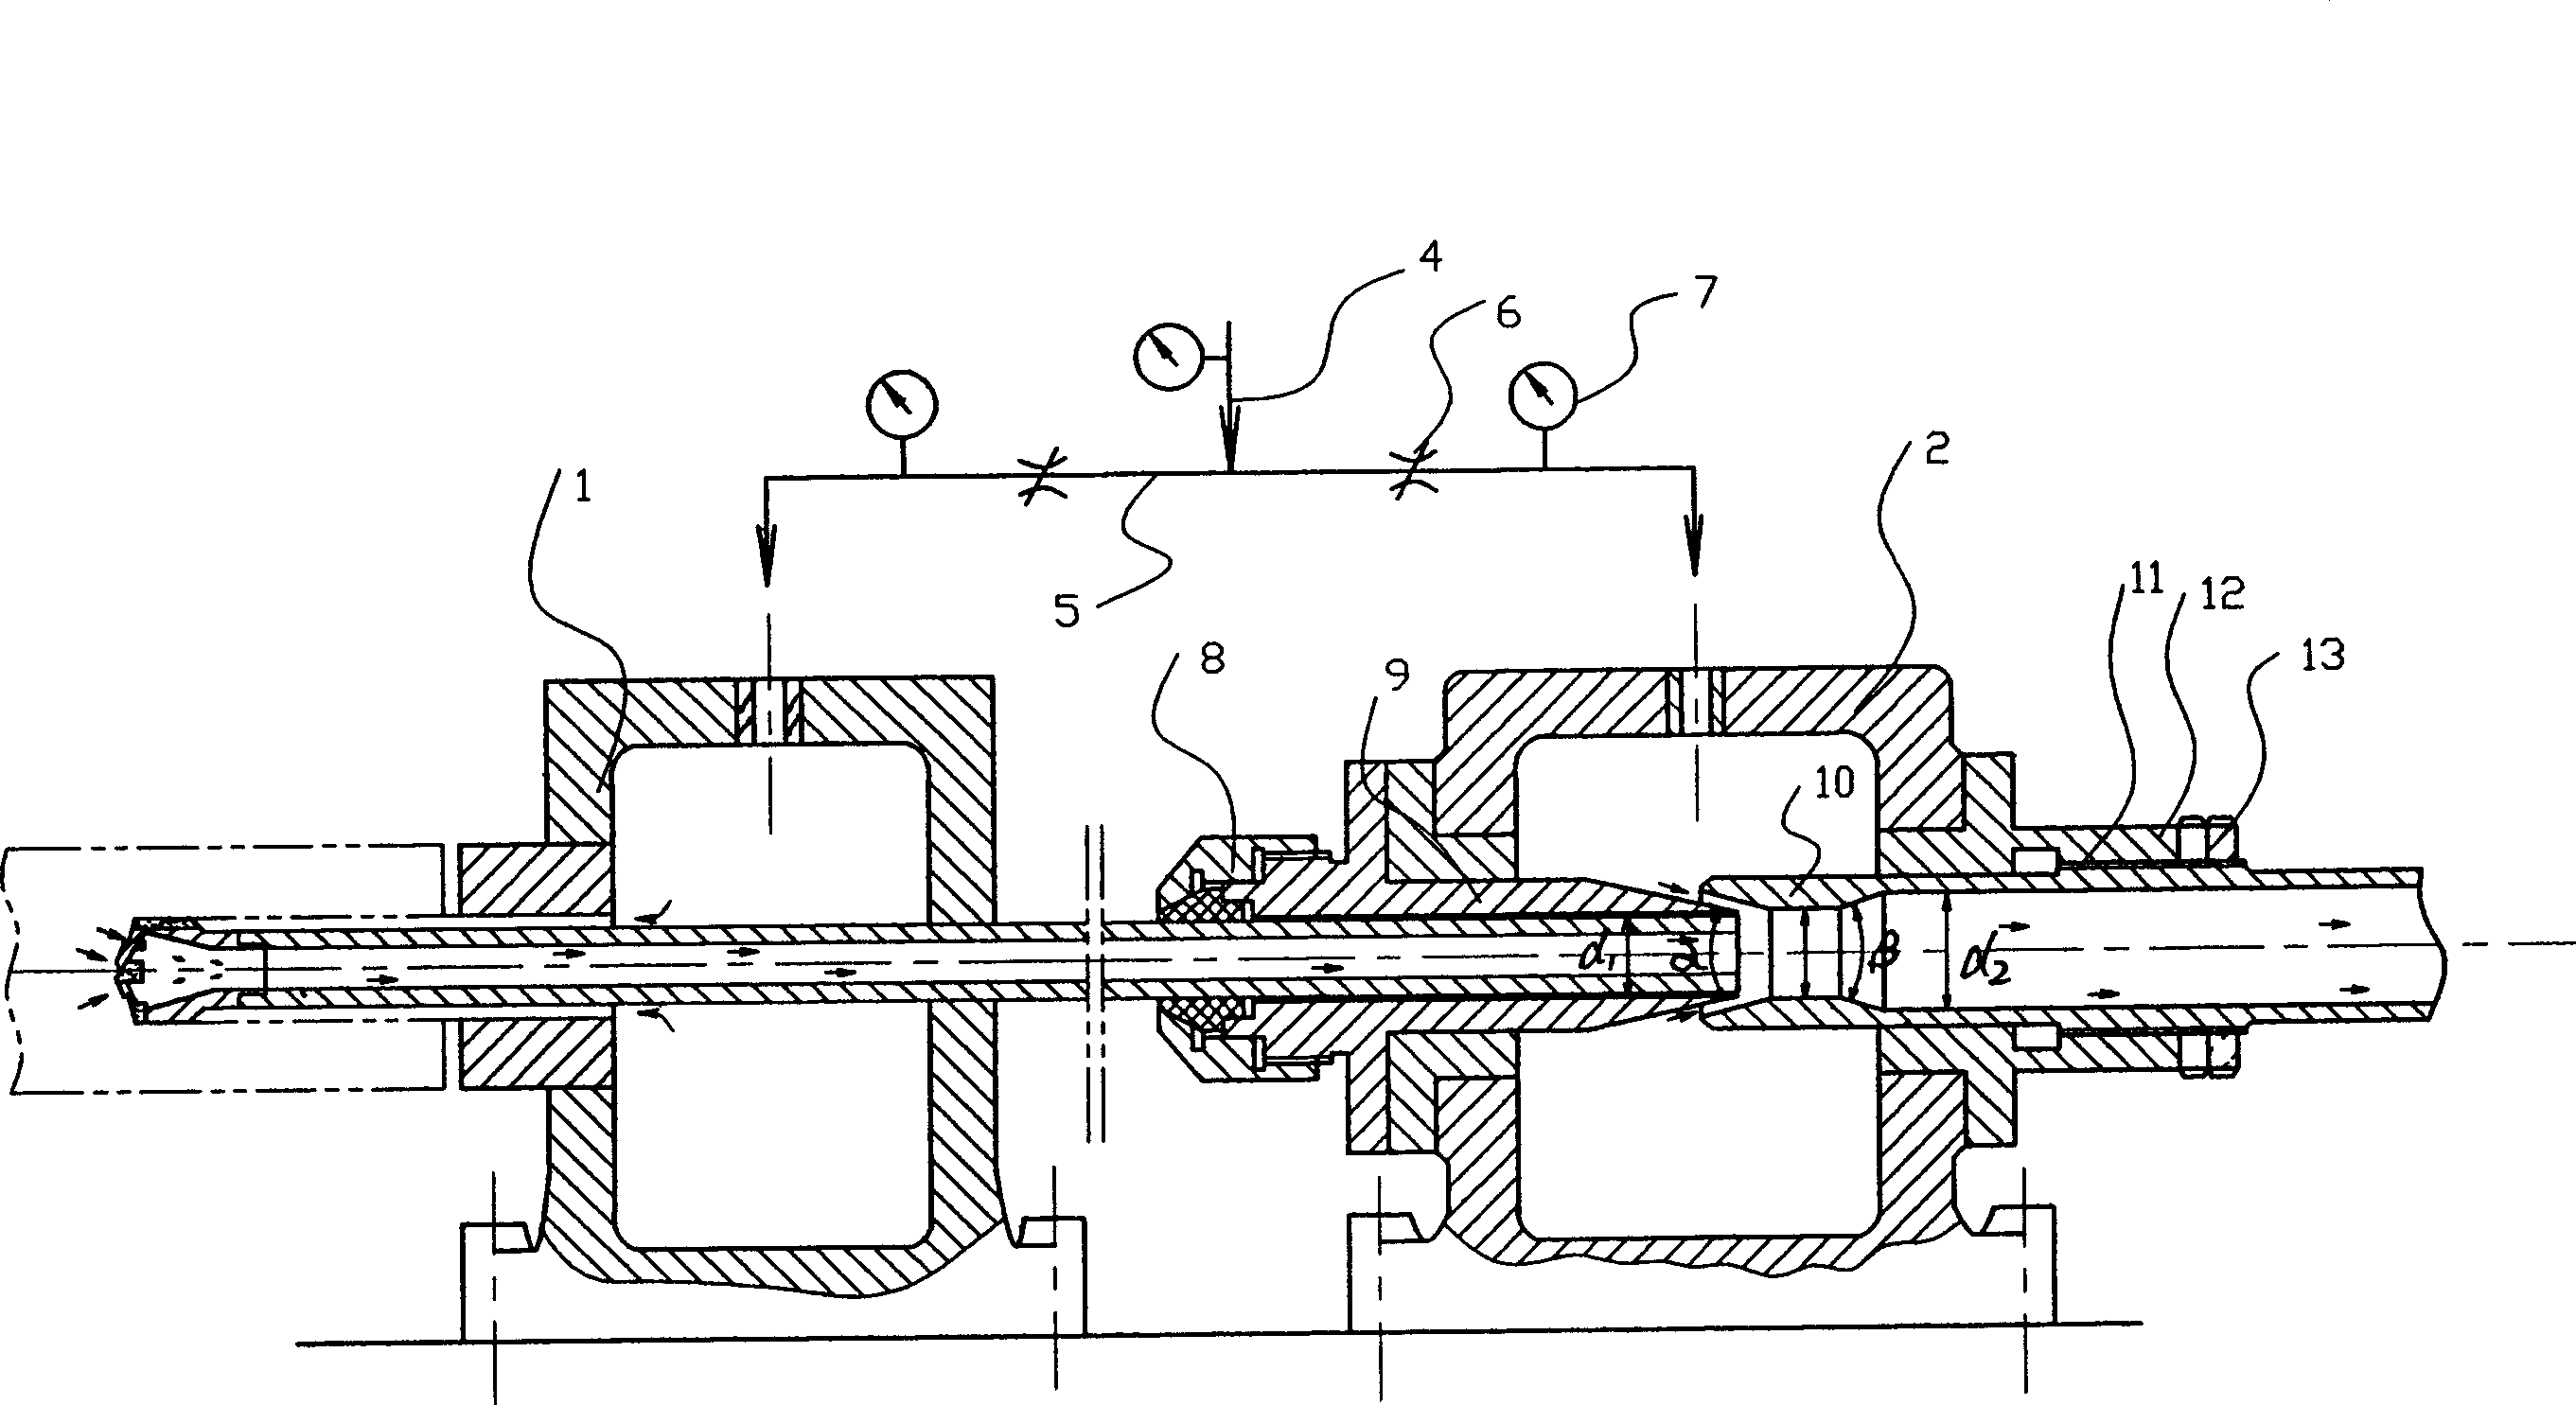 Power enlargement type apparatus for removing dust of ejecting drilling